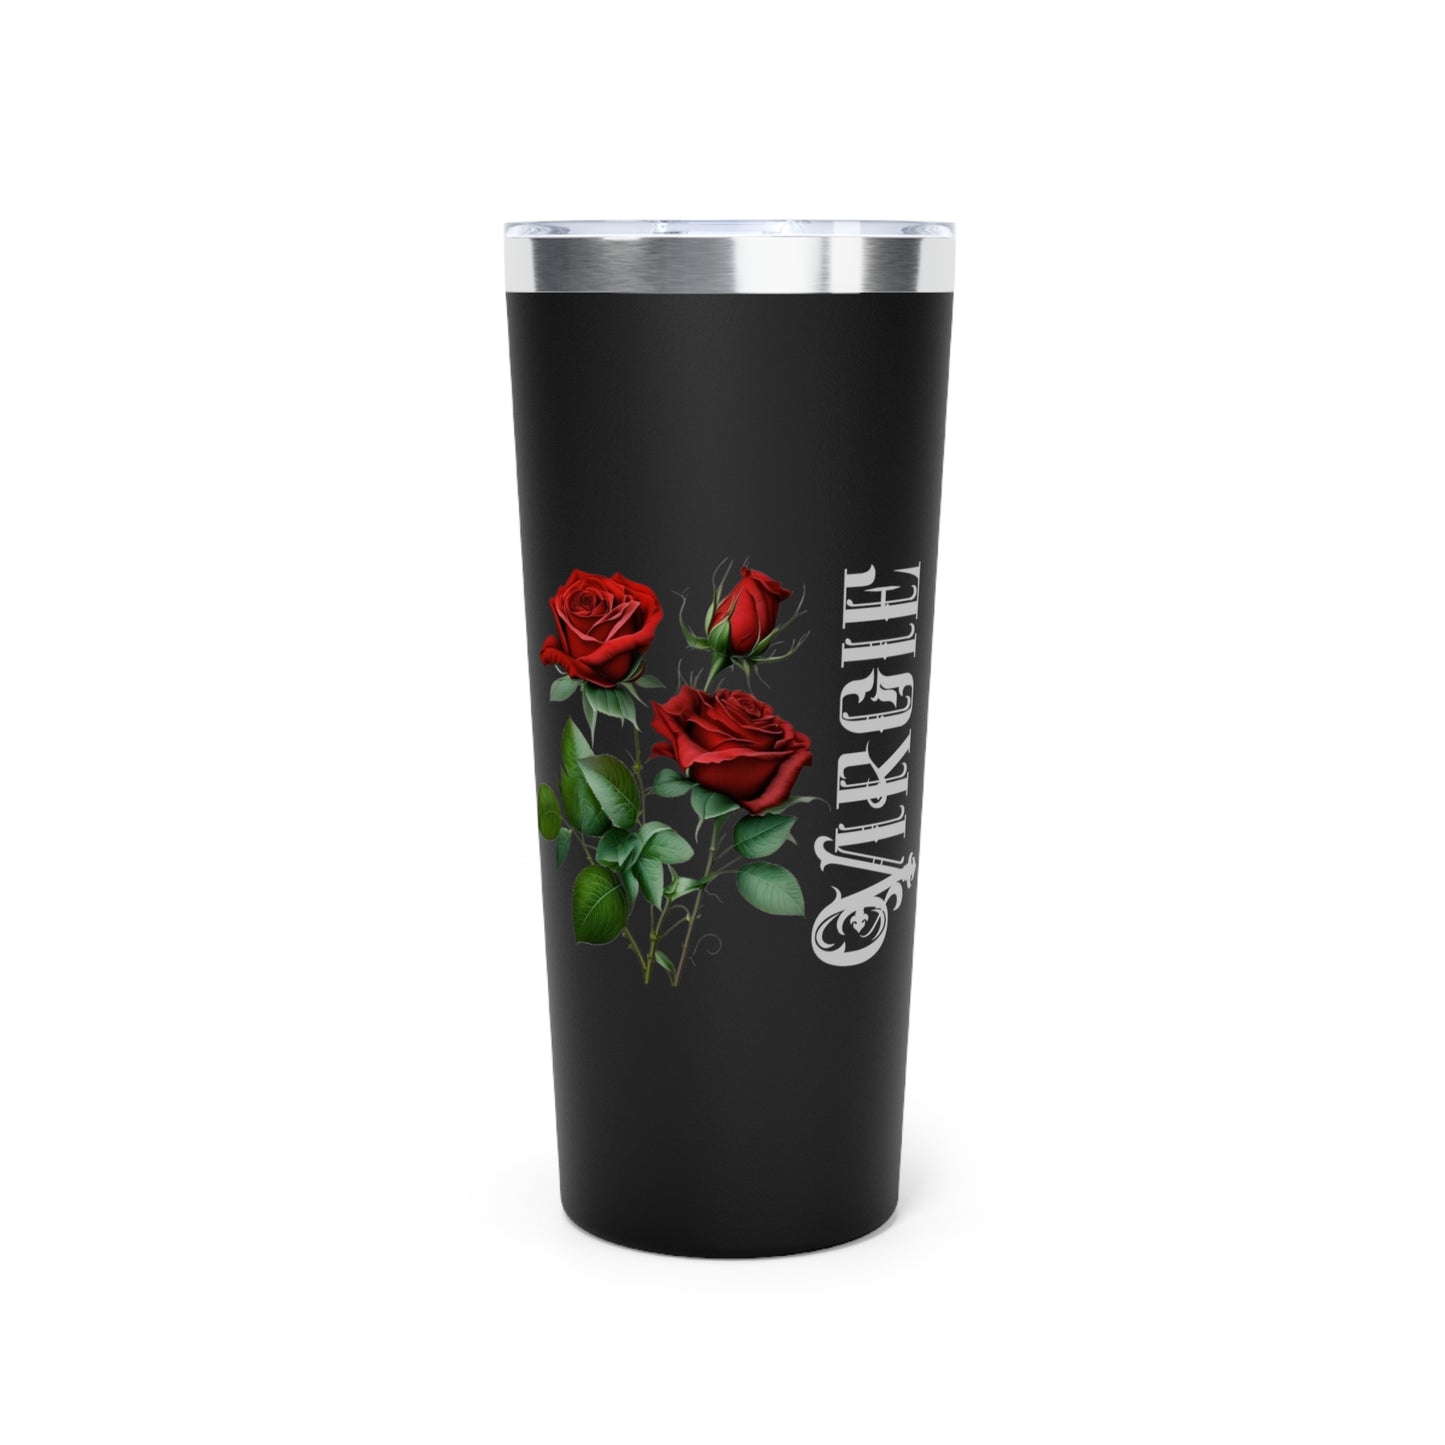 June Personalized Birth Flower Tumbler, Personalized Birth Flower Coffee Cup With Name, Gifts for Her, Bridesmaid Proposal, Party Favor